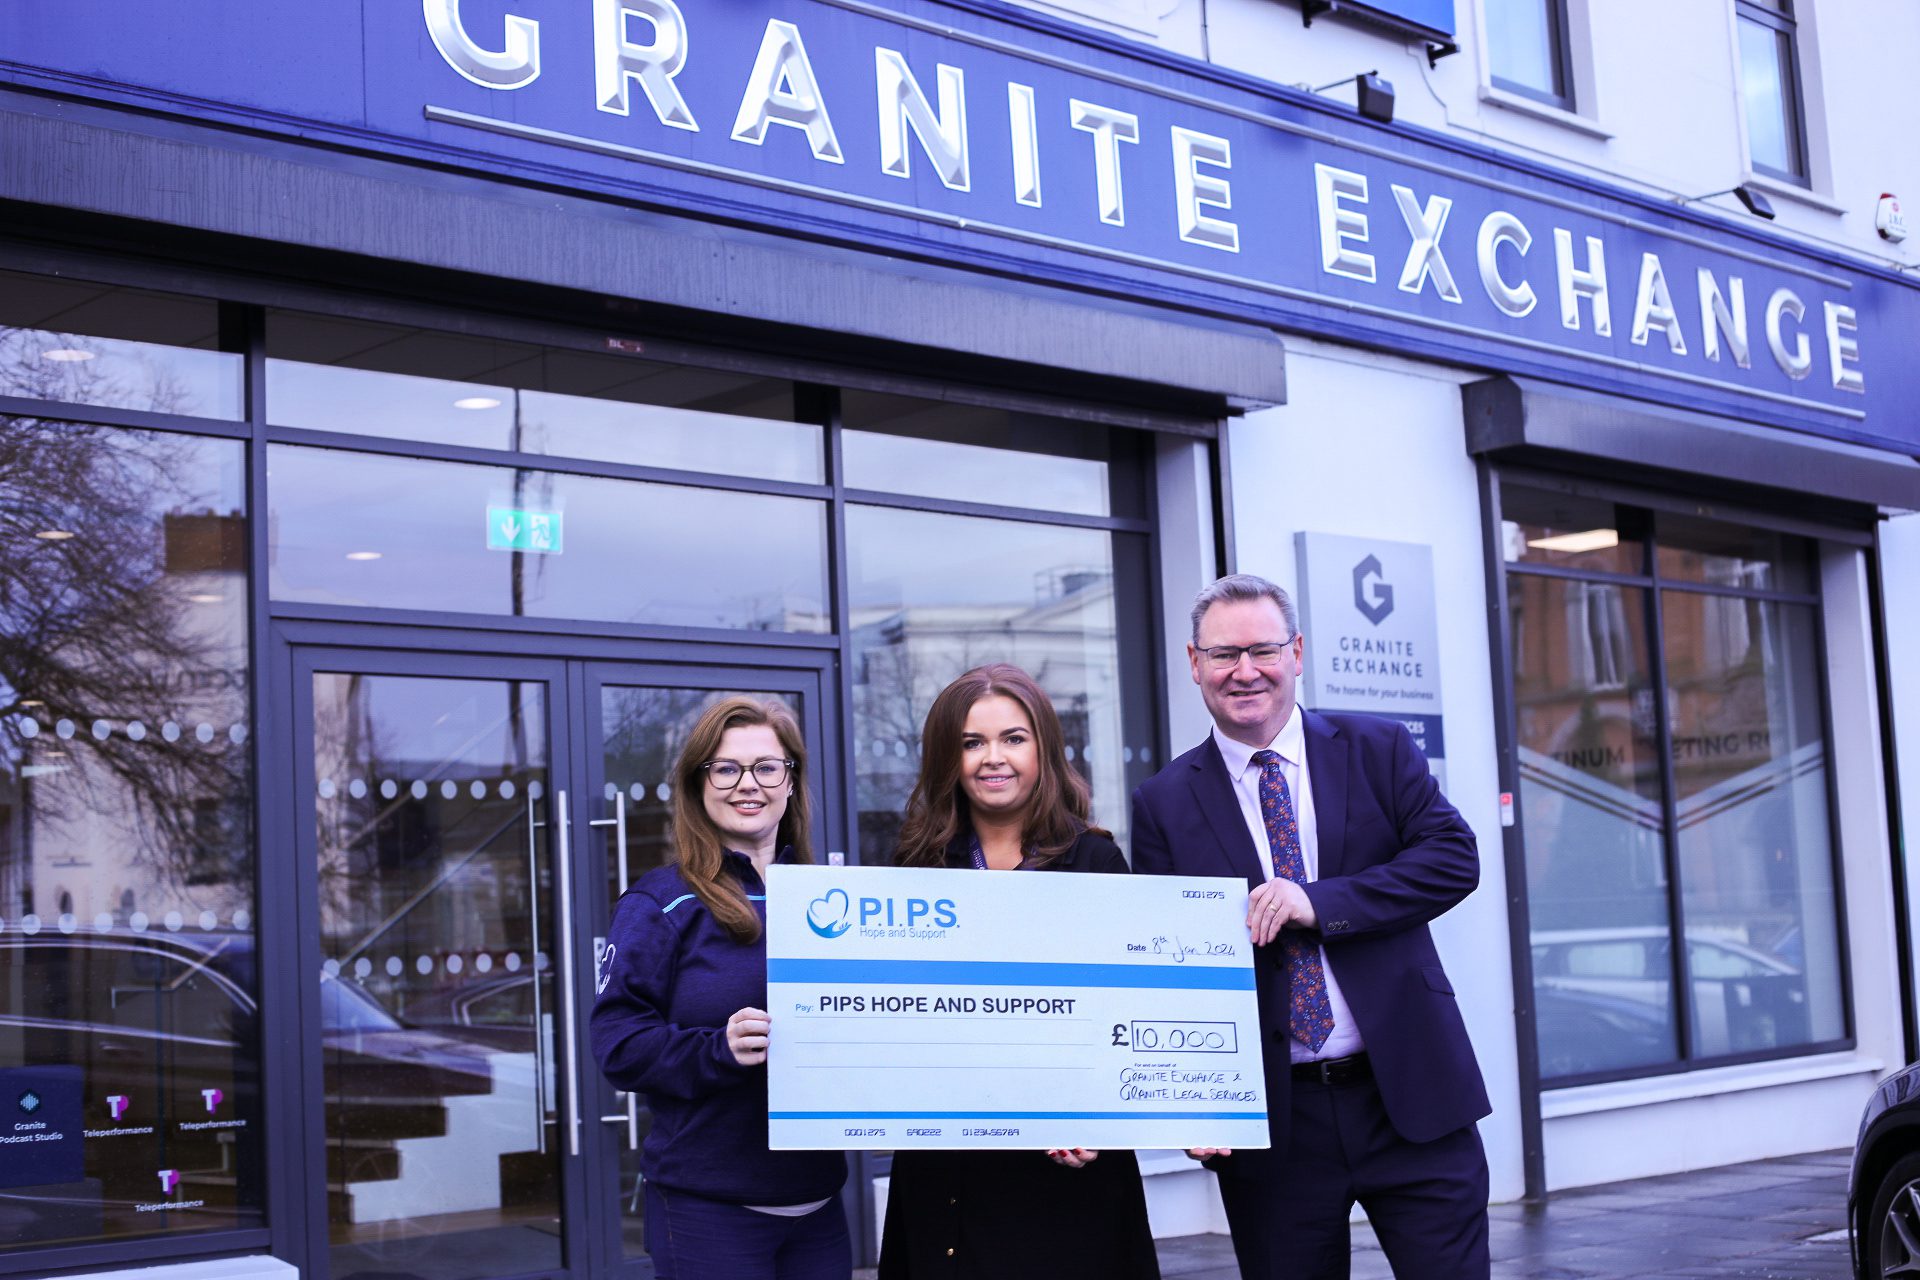 Granite Exchange and Granite Legal Services donate £10,000 to PIPS Hope and Support – helping to prevent suicide